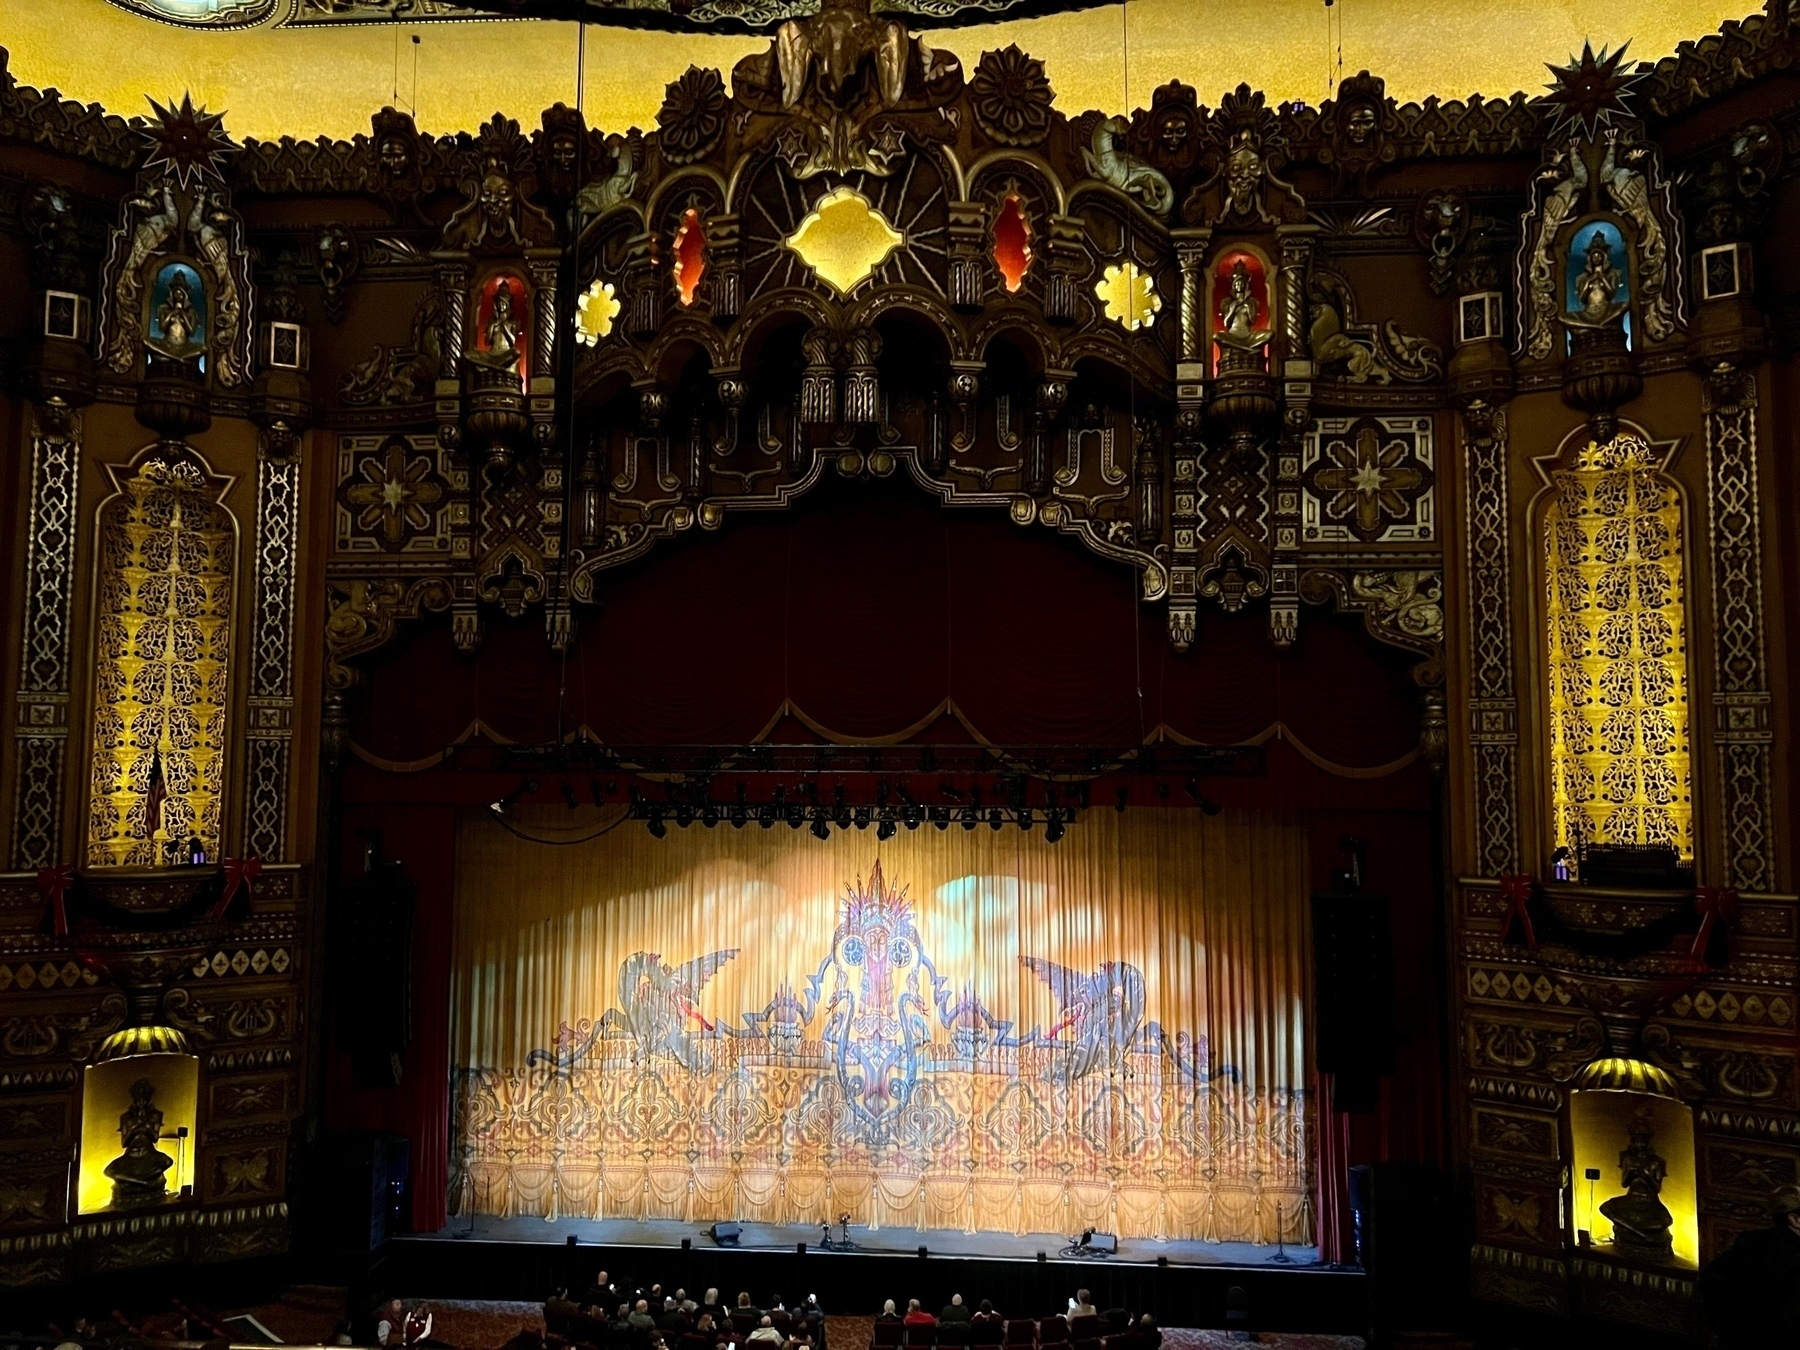 An ornate theater interior with an audience facing a stage showcasing a closed curtain featuring intricate designs, under elaborate architectural decorations and illuminated panels.